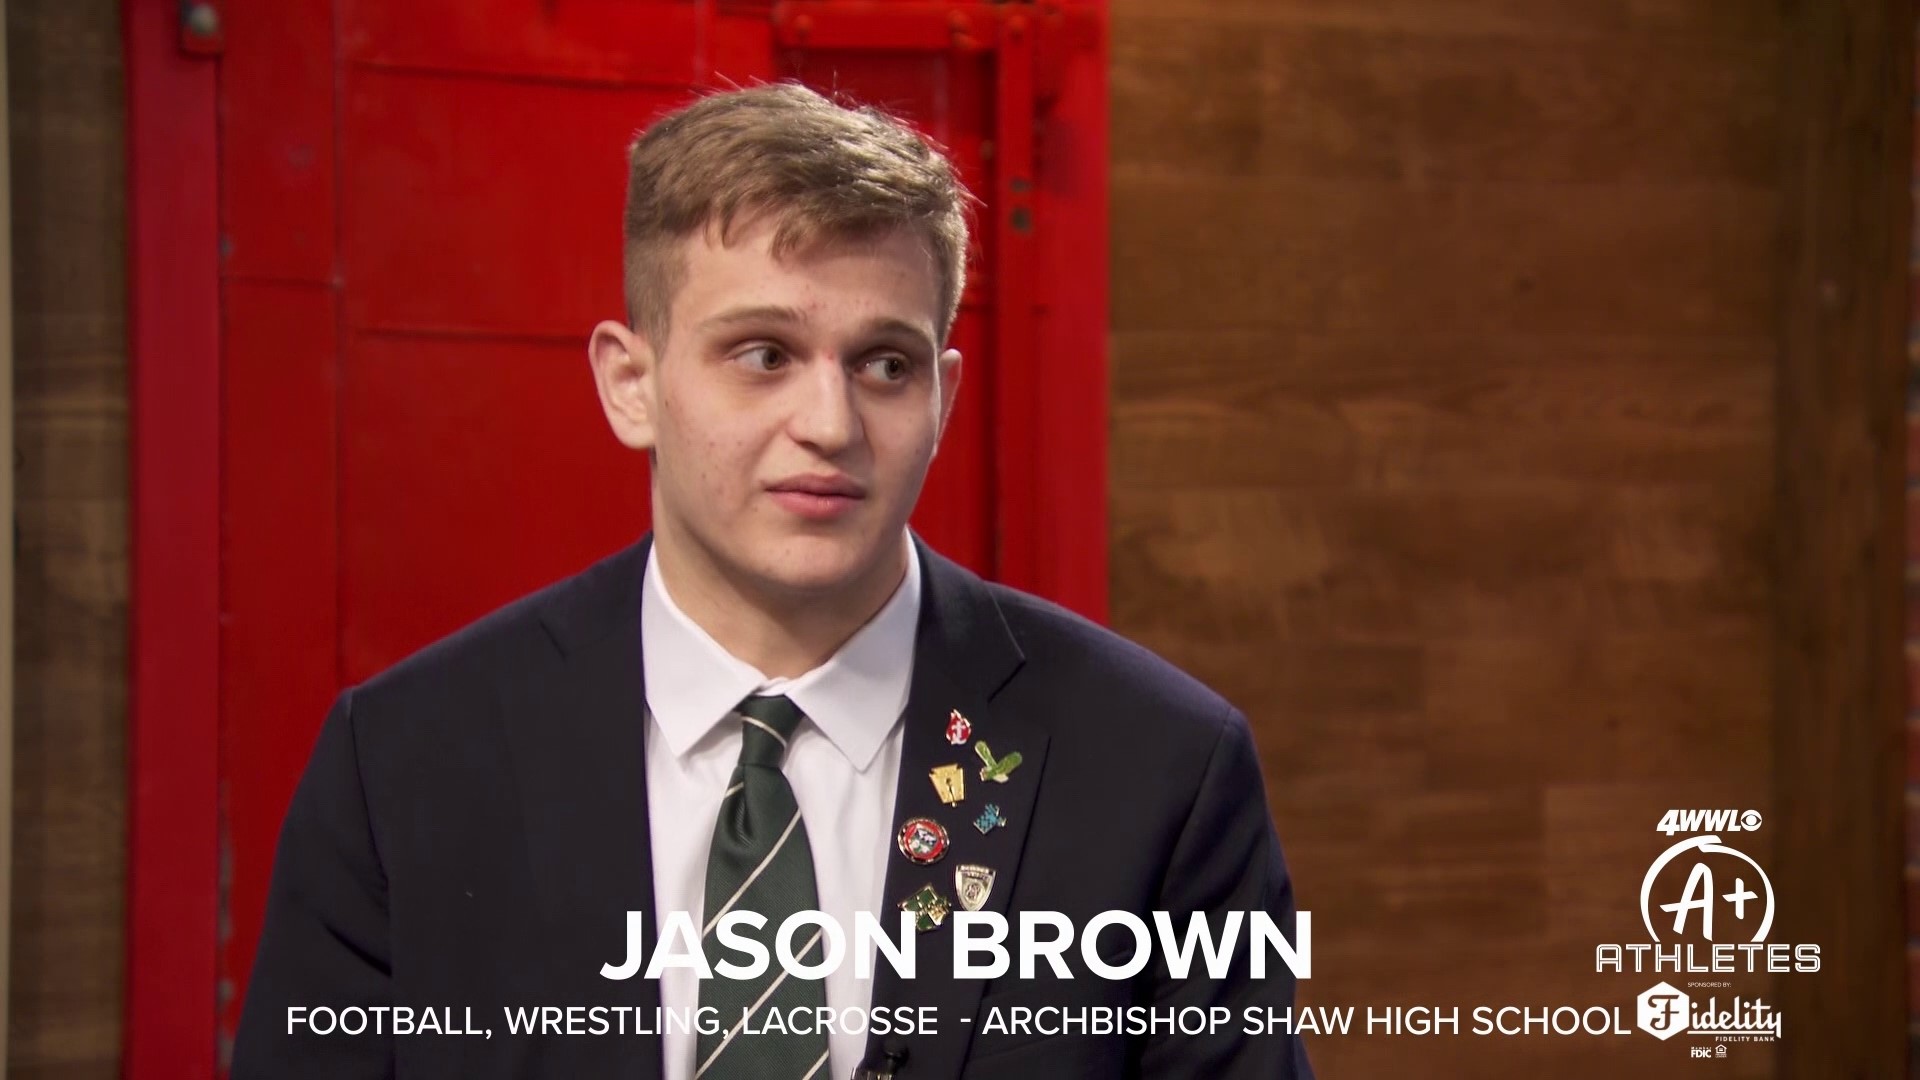 WWL-TV is honoring athletes who excel on and off the field, like Archbishop Shaw's Jason Brown